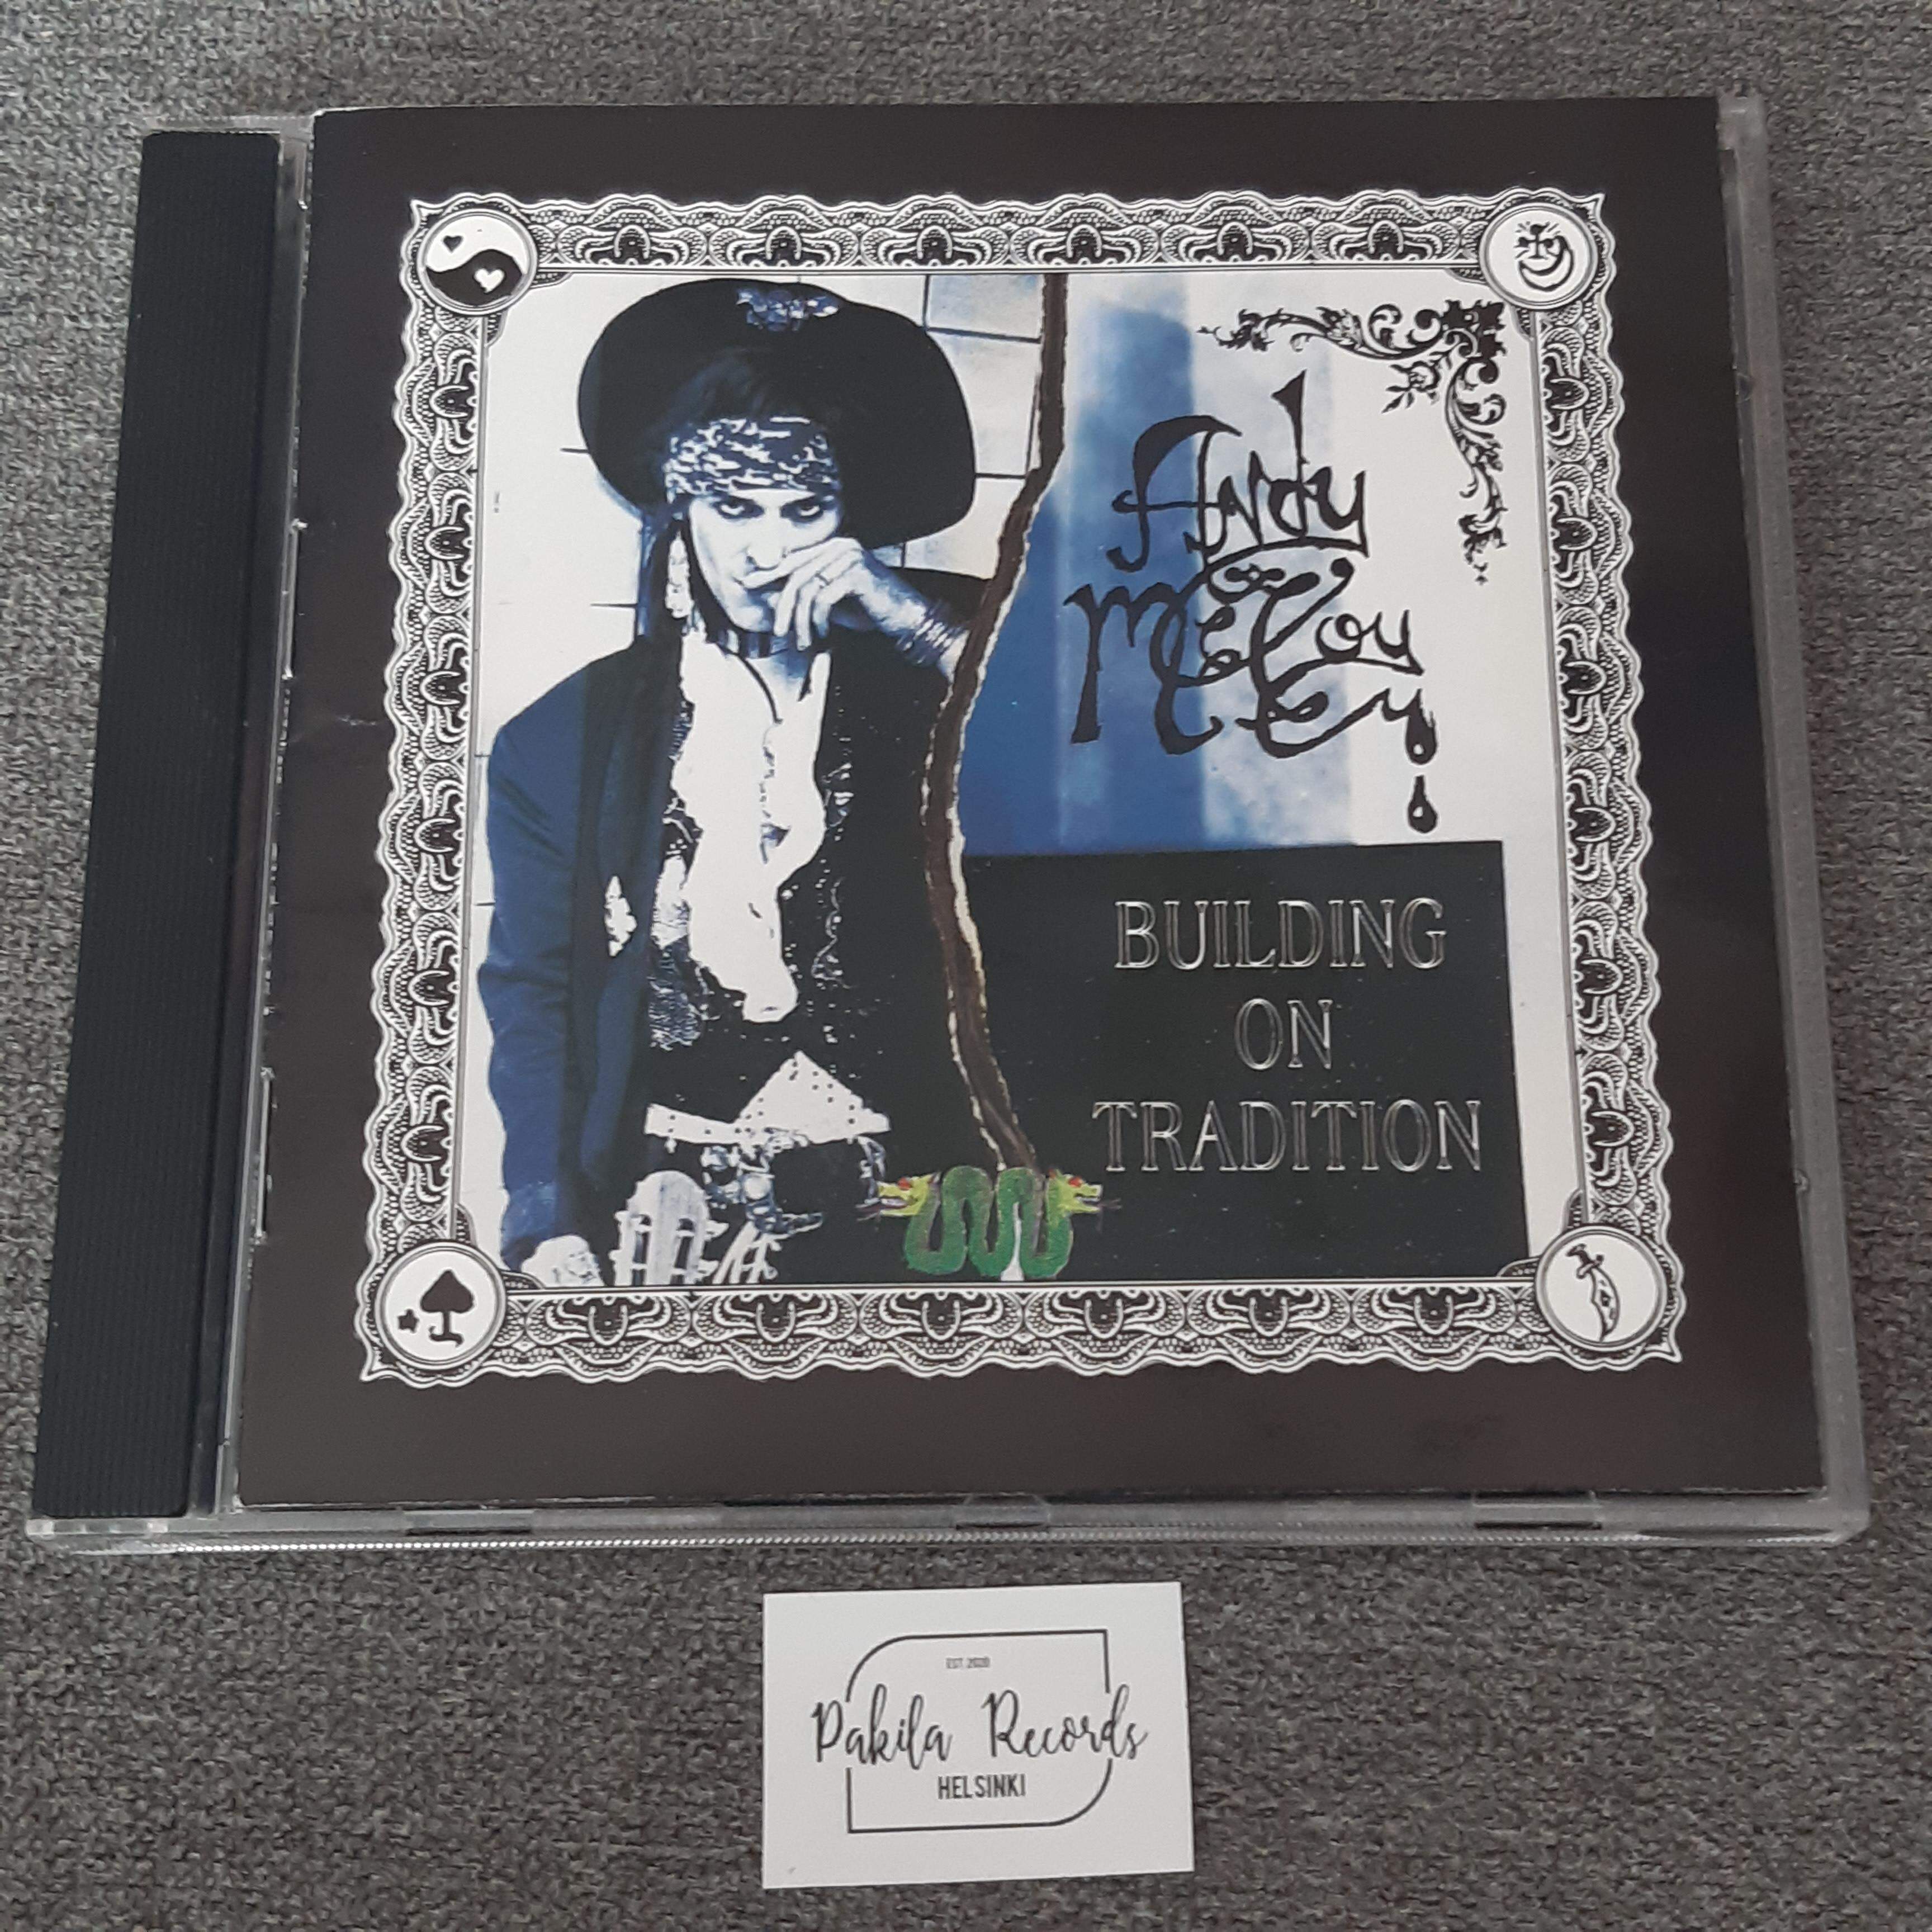 Andy McCoy - Building On Tradition - CD (käytetty)